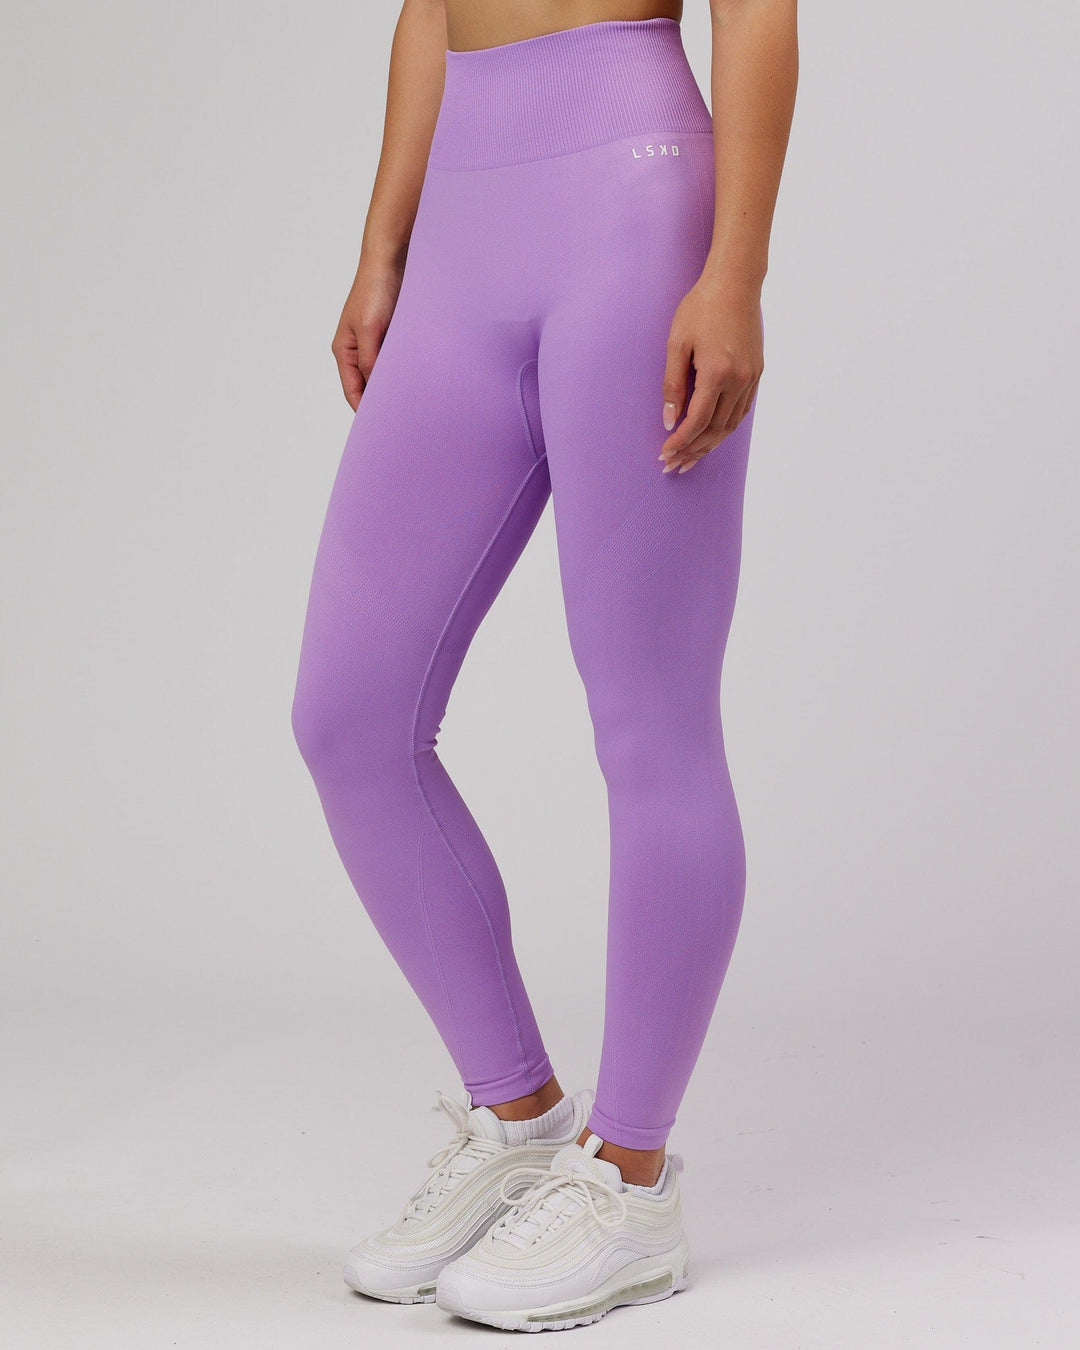 Limitless Seamless Full Length Tights - Lilac